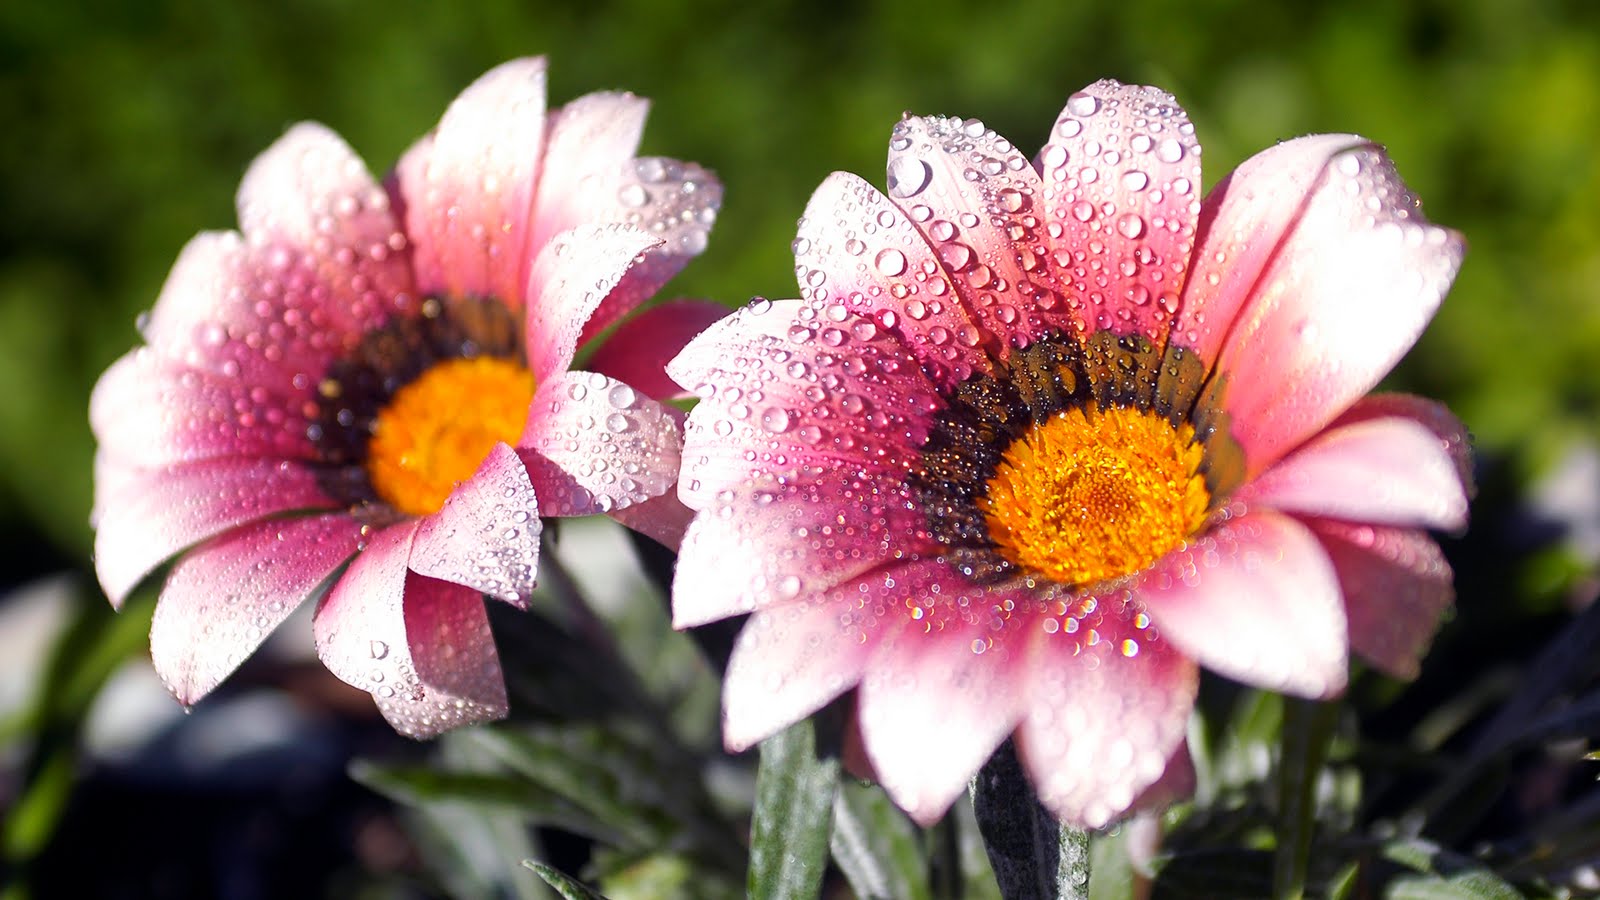 Flowers-Hd-Wallpapers-Free-Download -